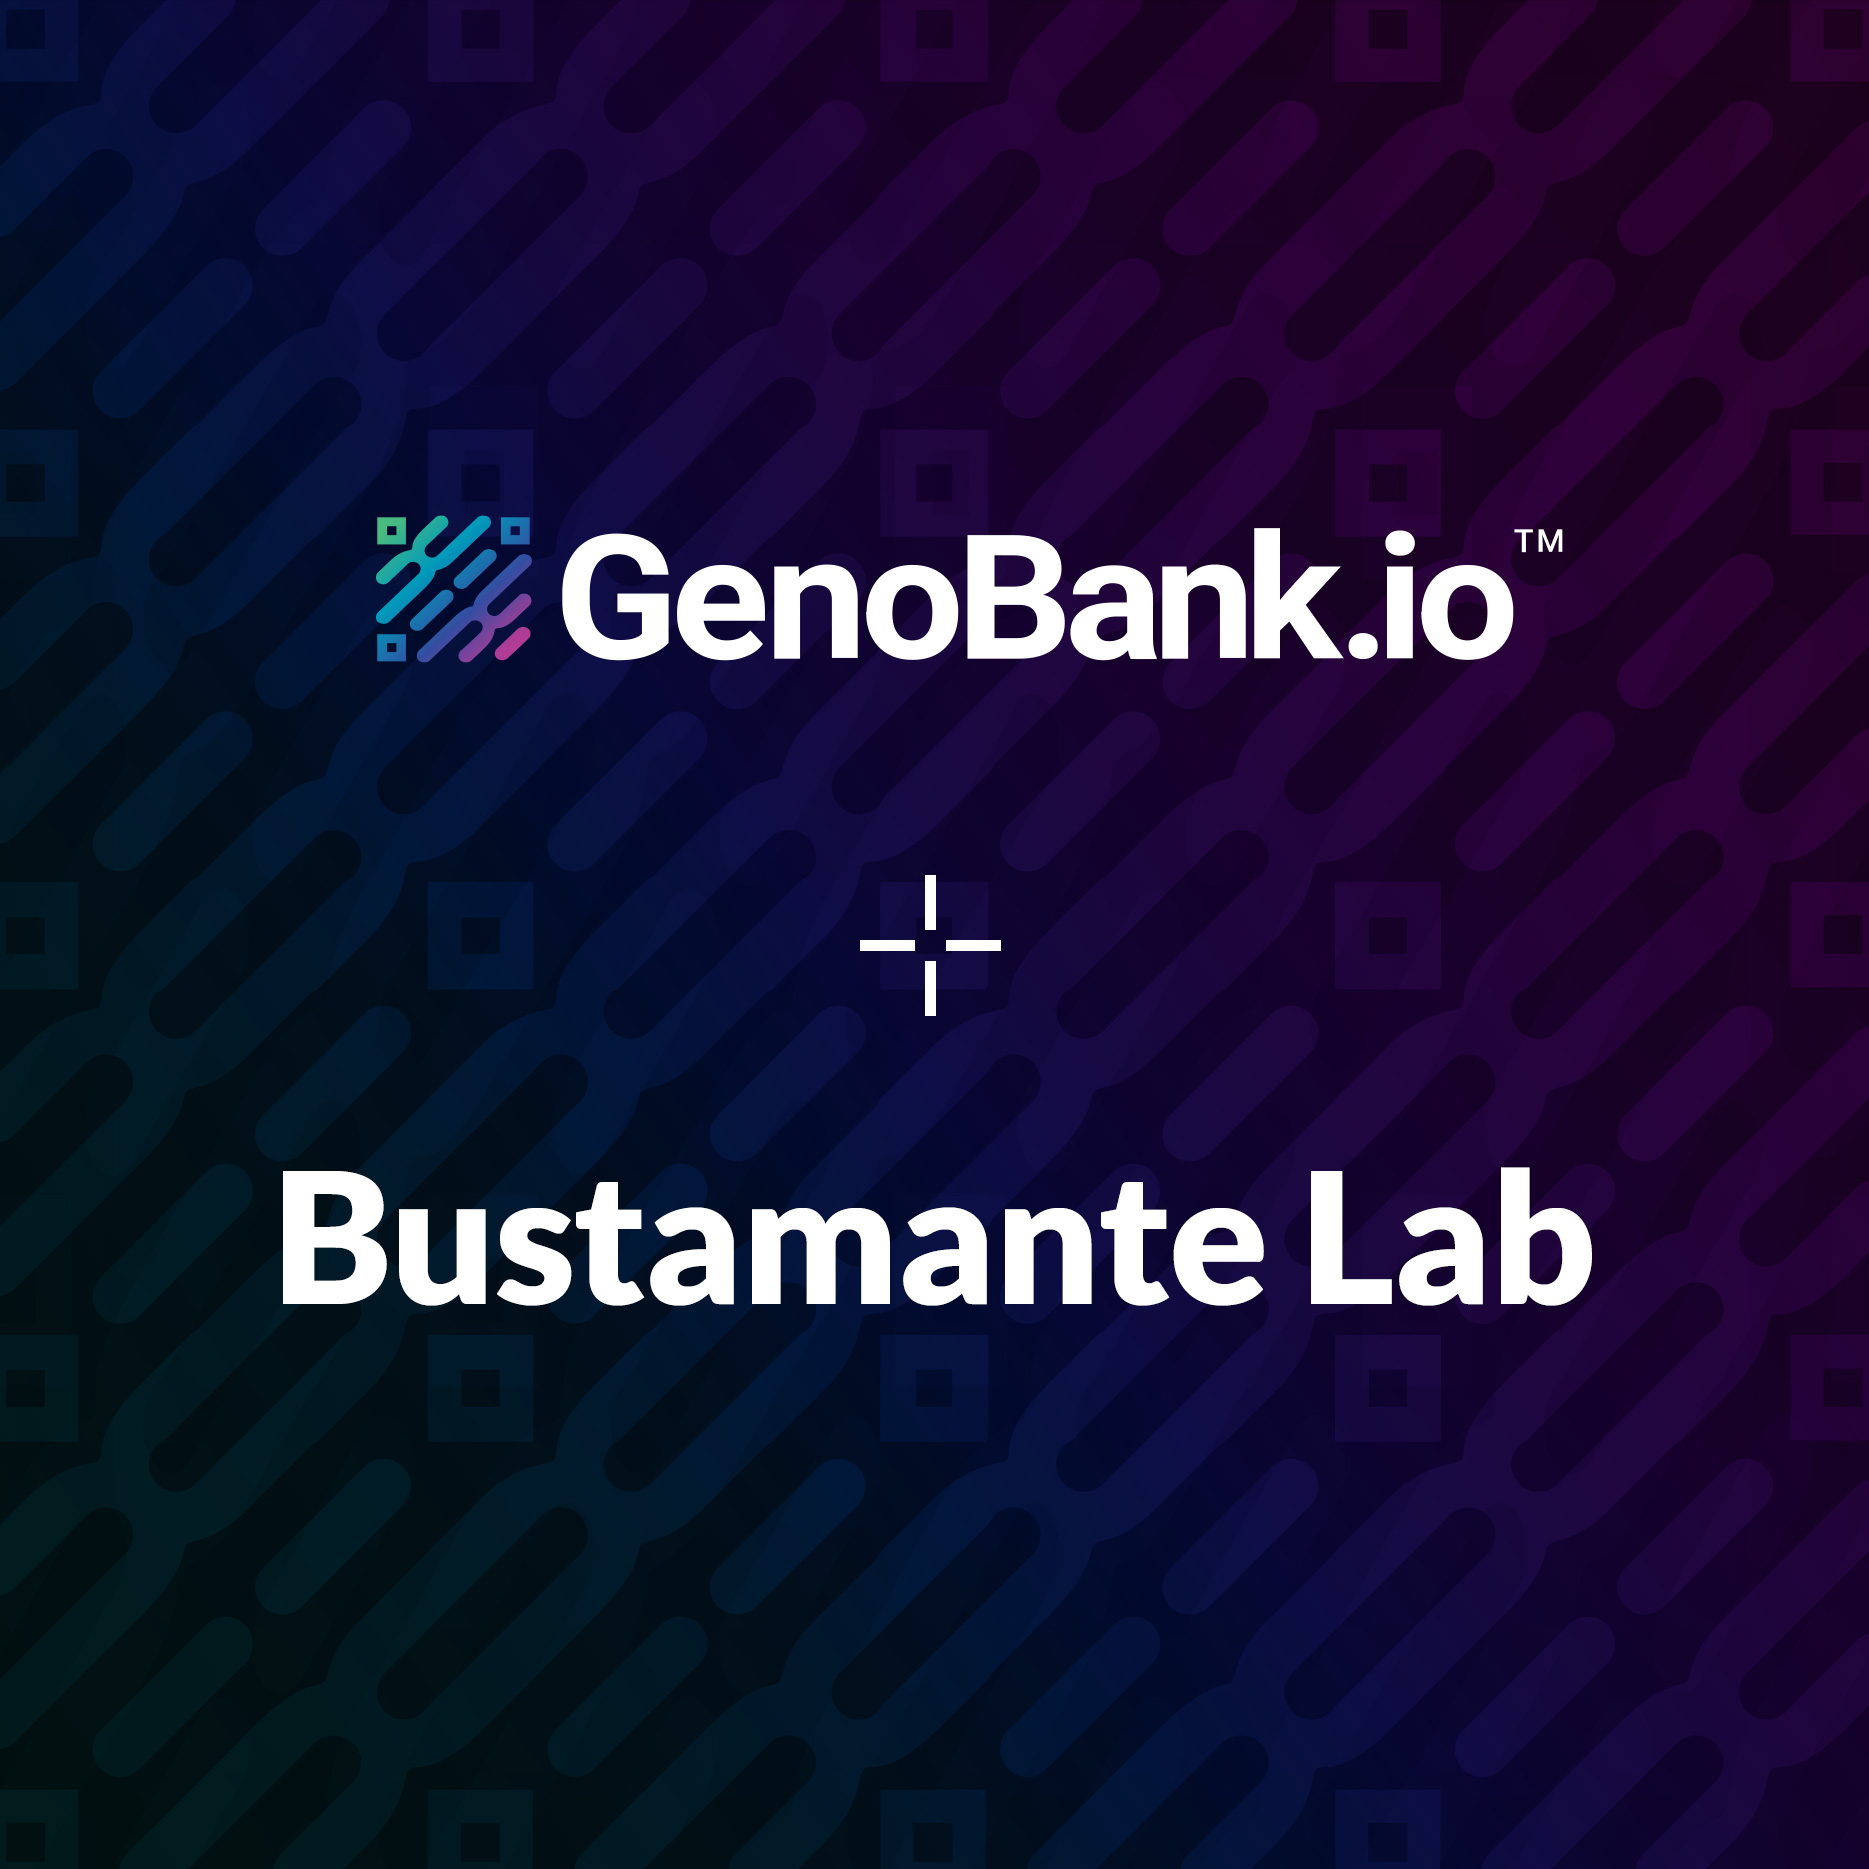 GenoBank.io is Proud to Announce a Partnership with Bustamante Lab